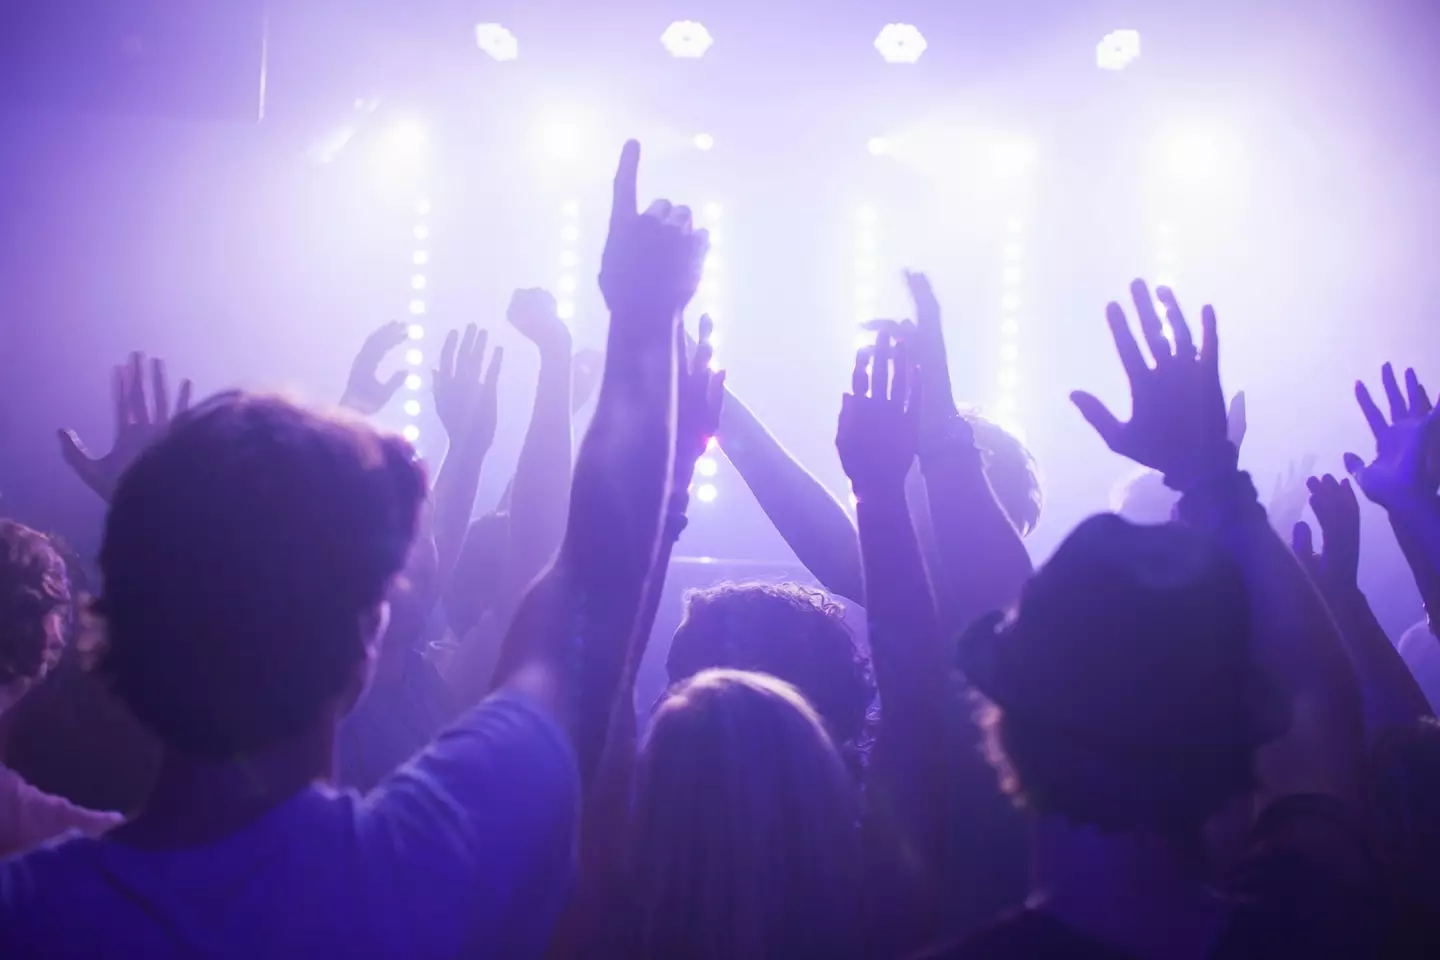 A club night twice a week could be costing you £24,000 over 10 years.